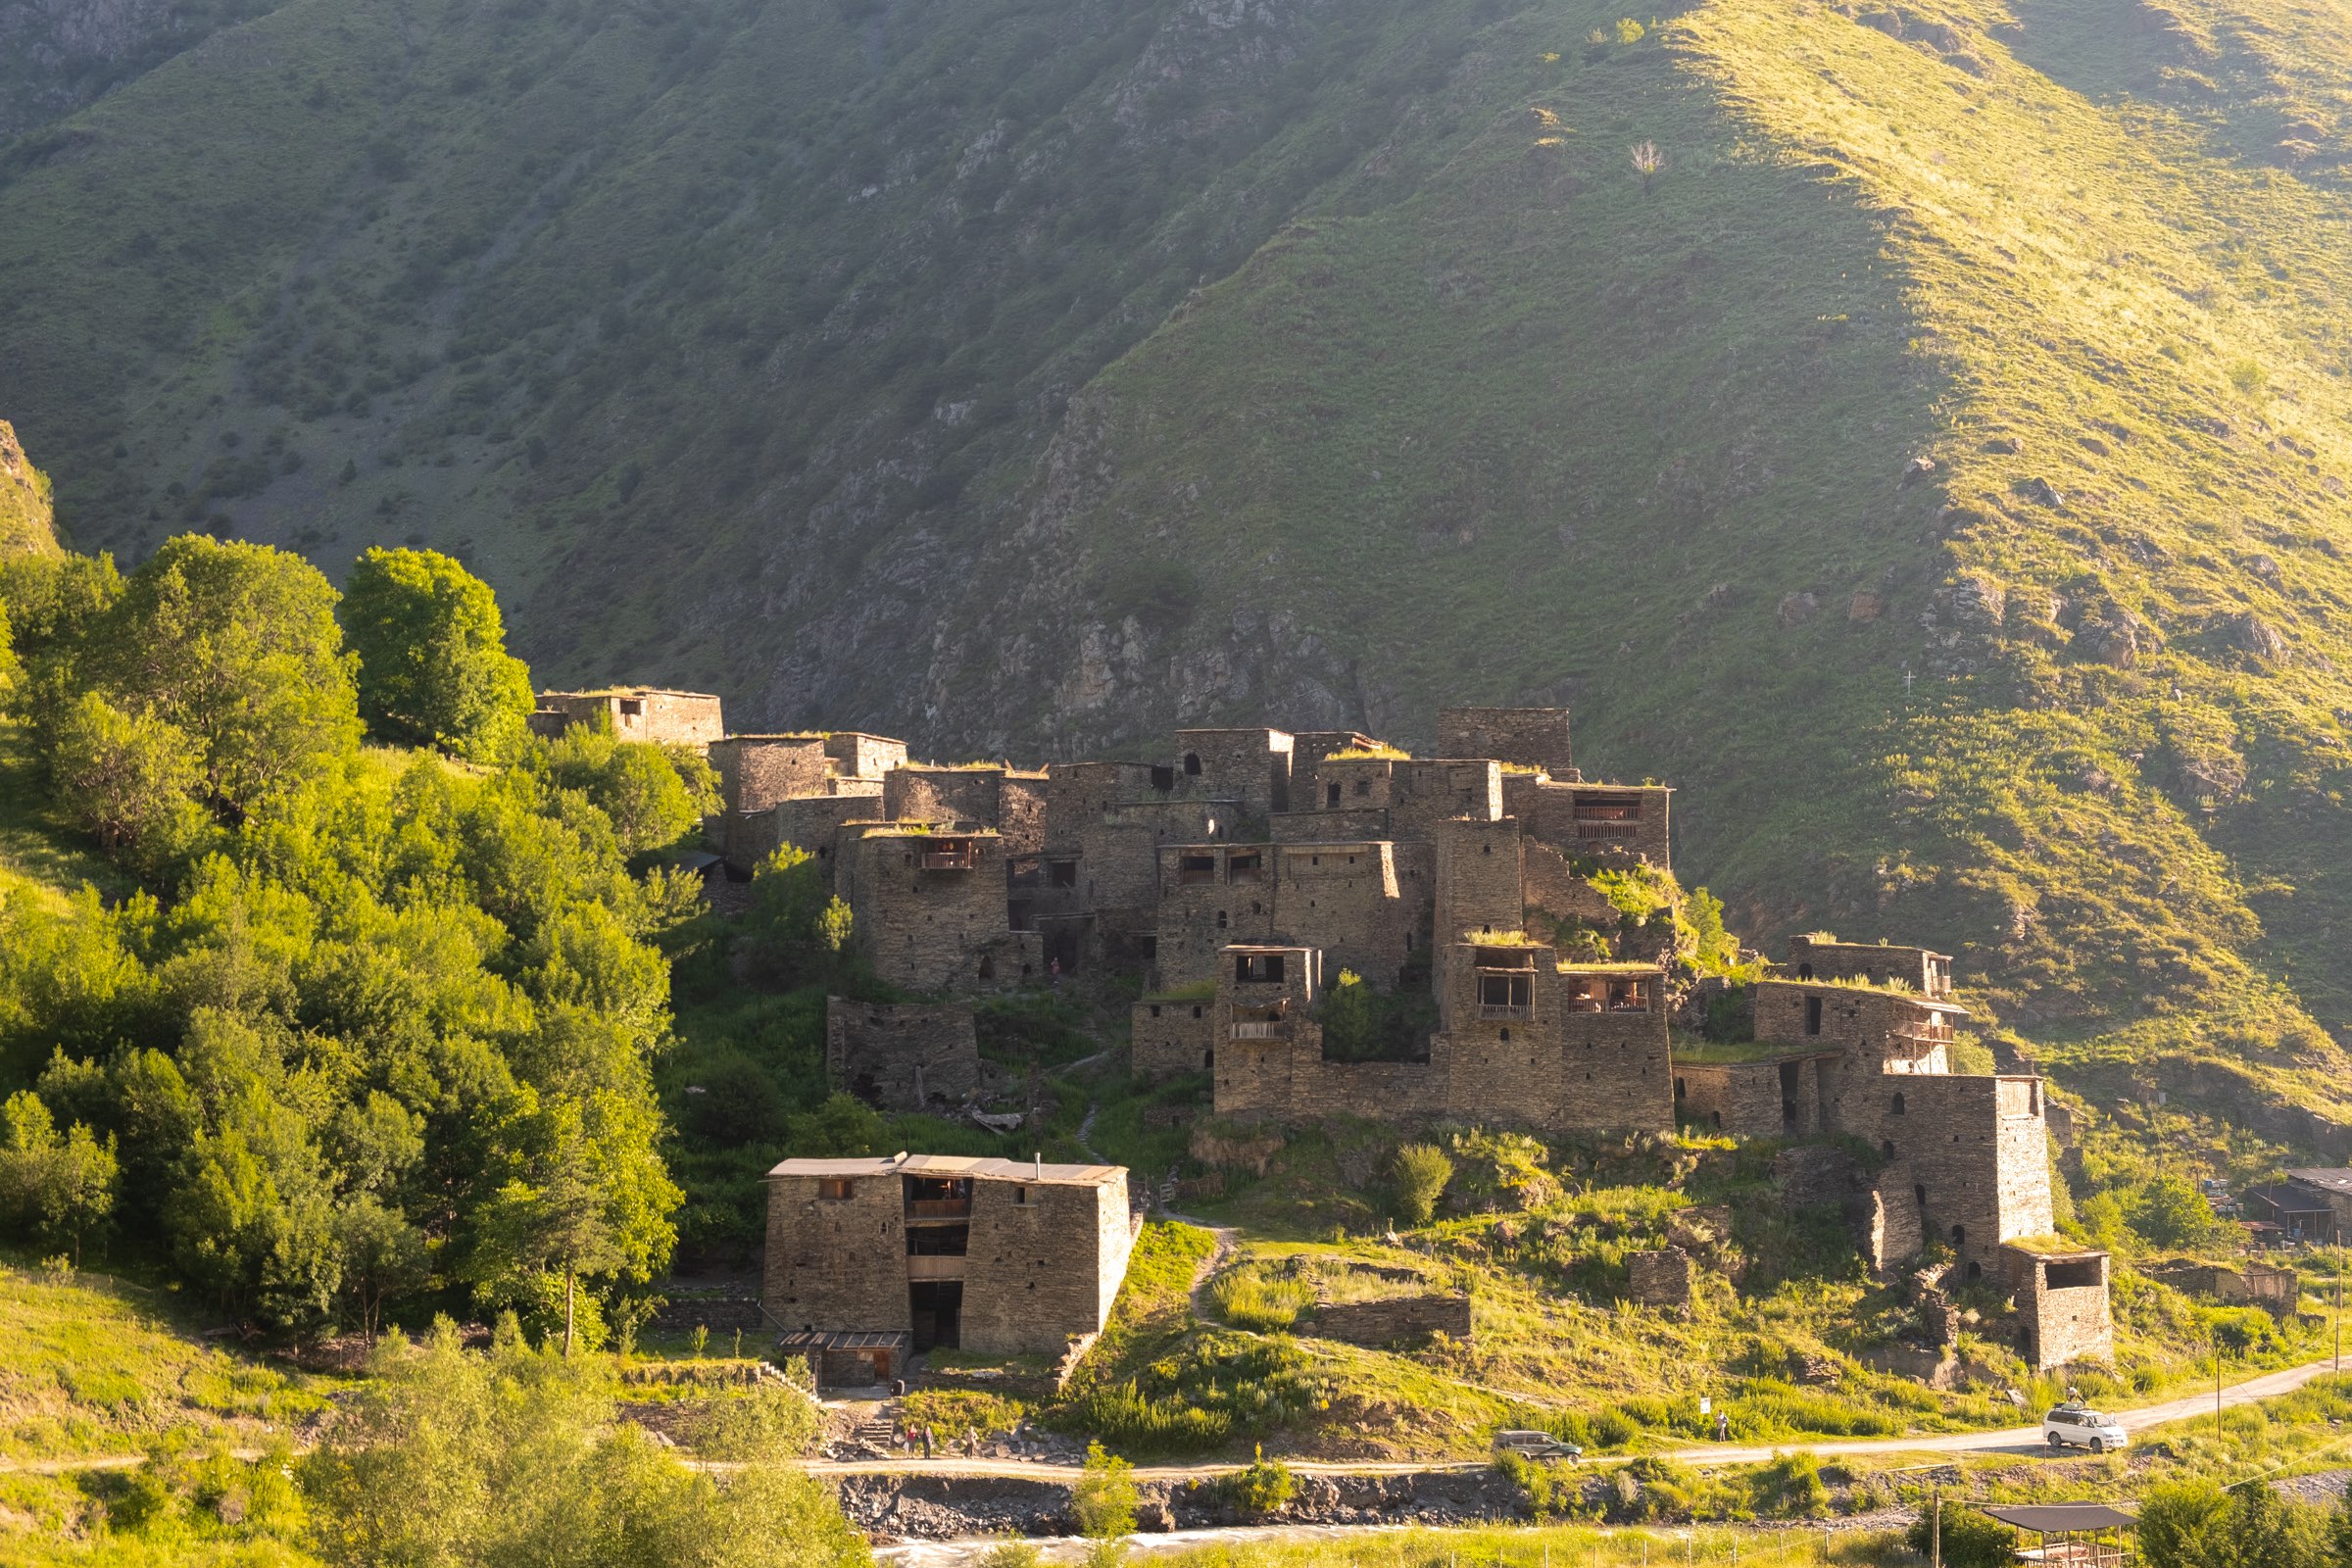 The ancient medieval village of Shatili, Khevsureti glowing in the early morning light